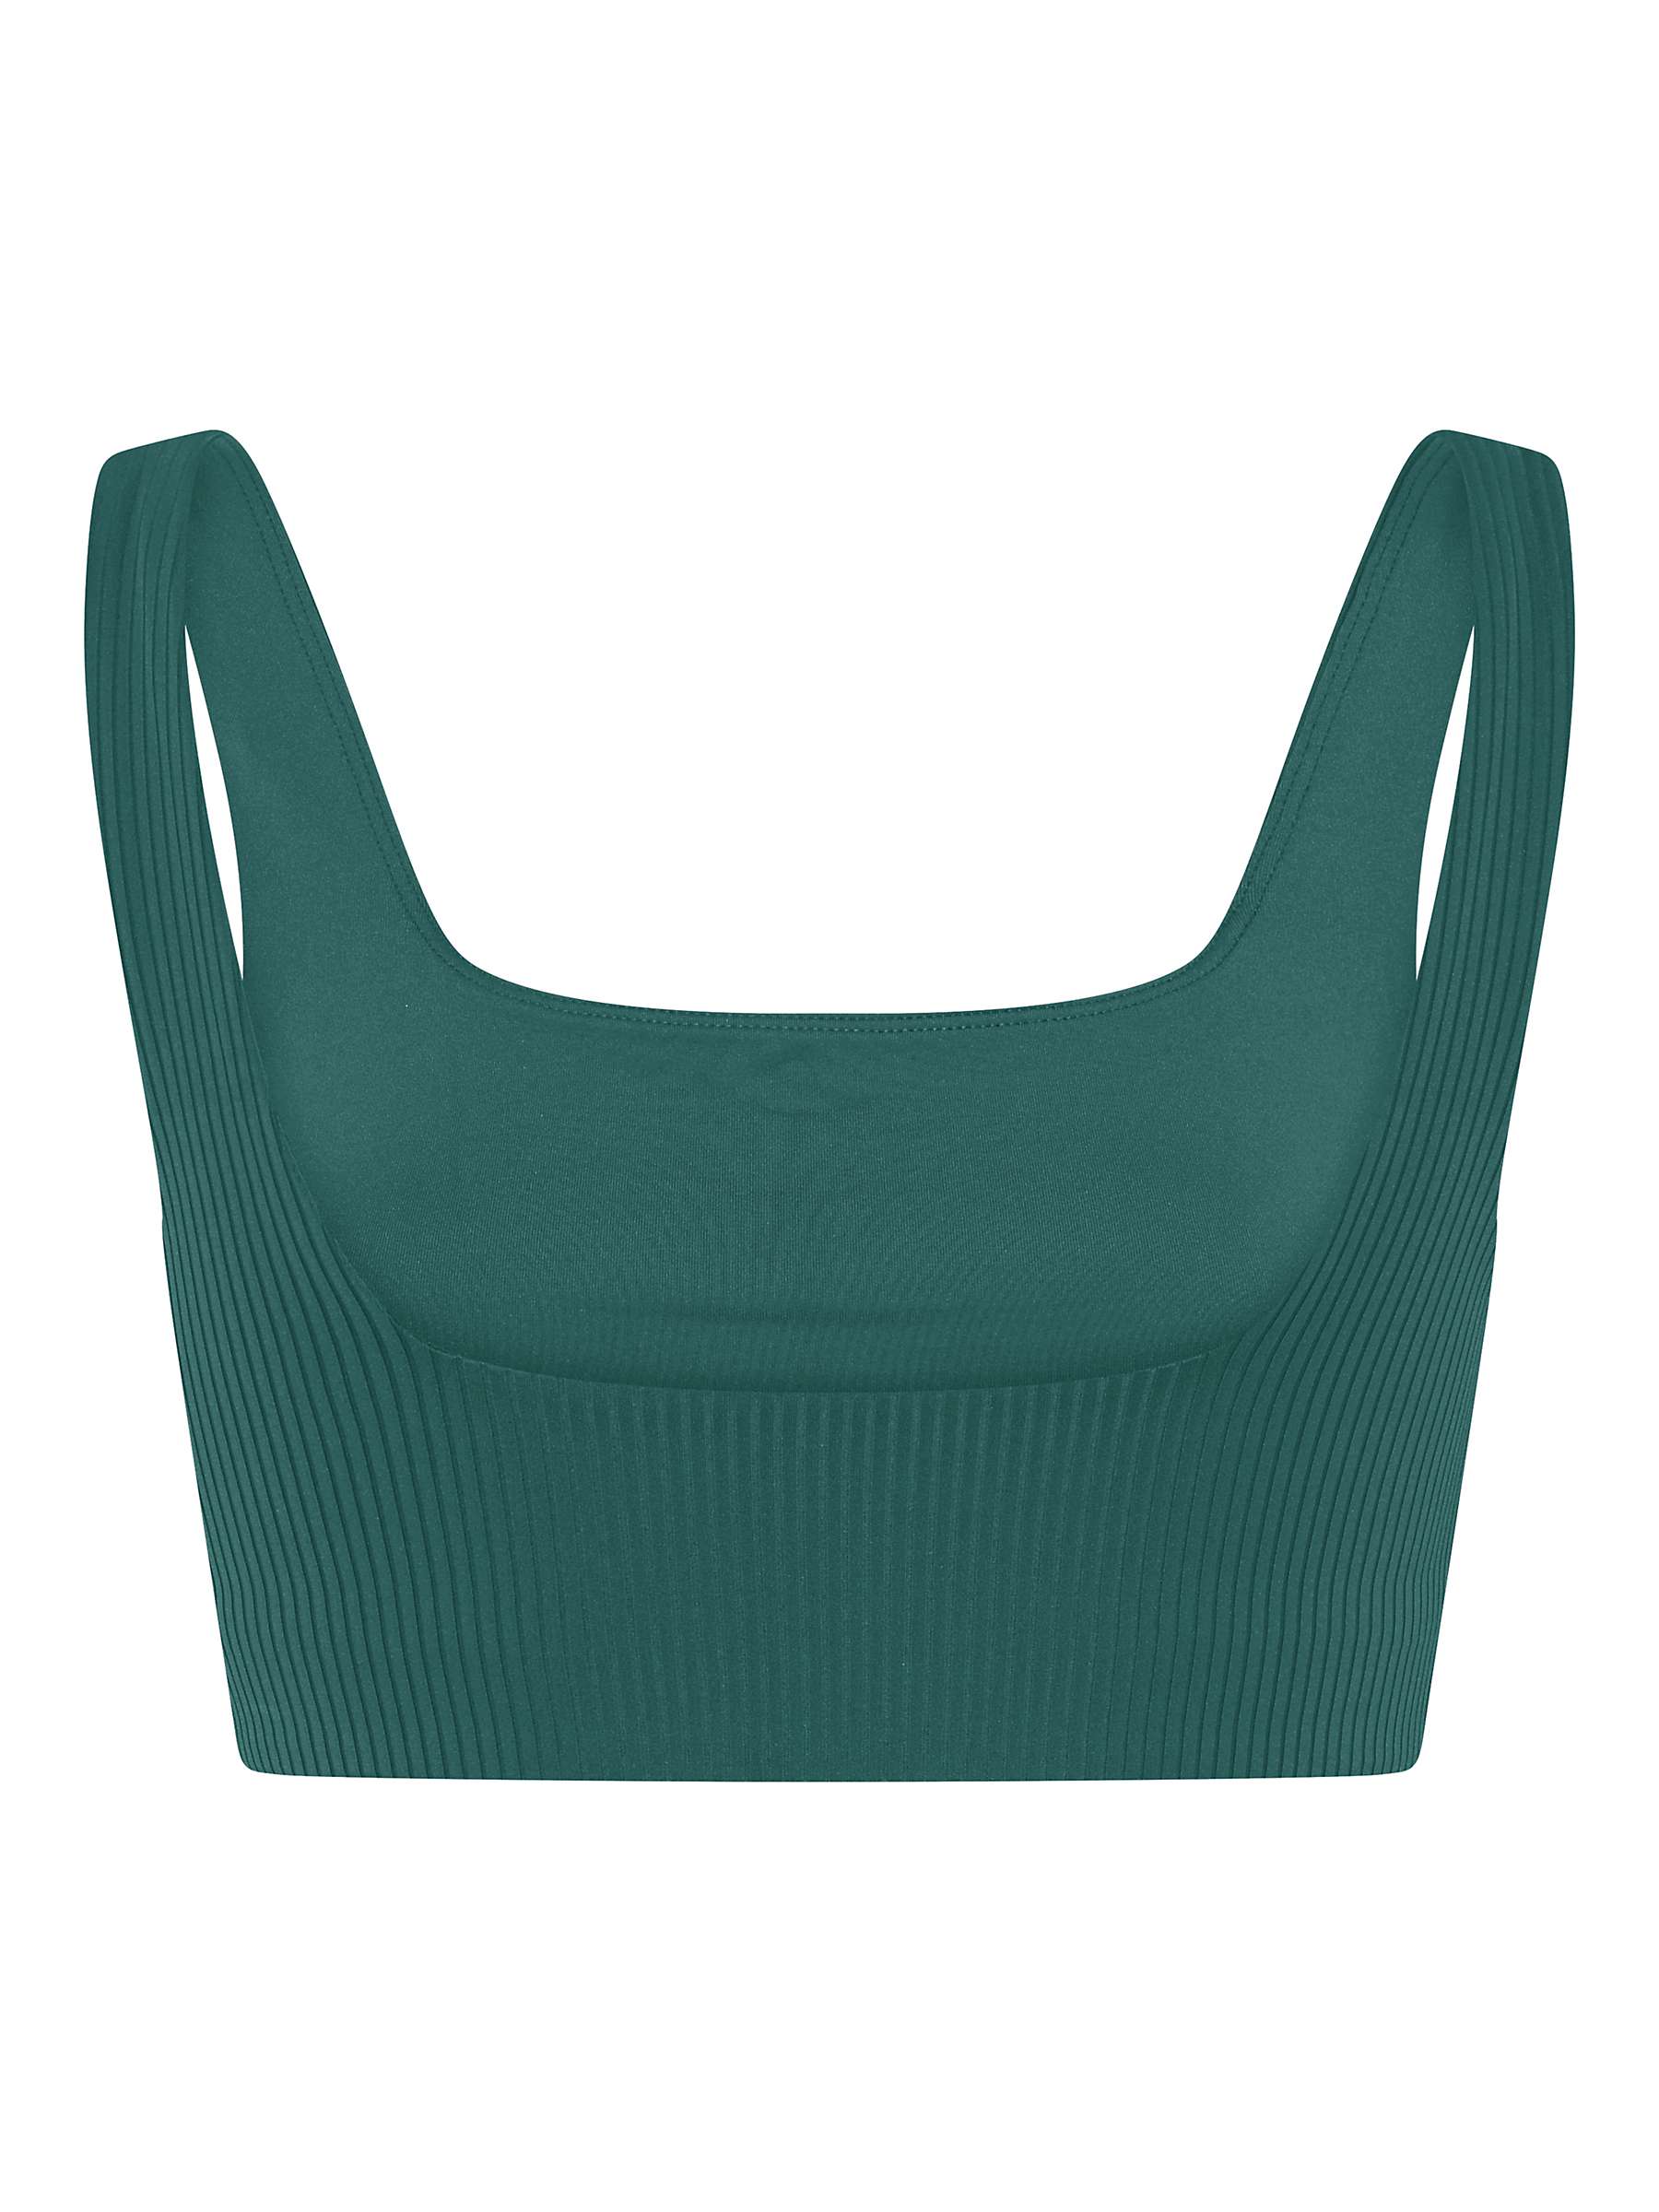 Buy Girlfriend Collective Tommy Ribbed Sports Bra, Rain Forest Online at johnlewis.com